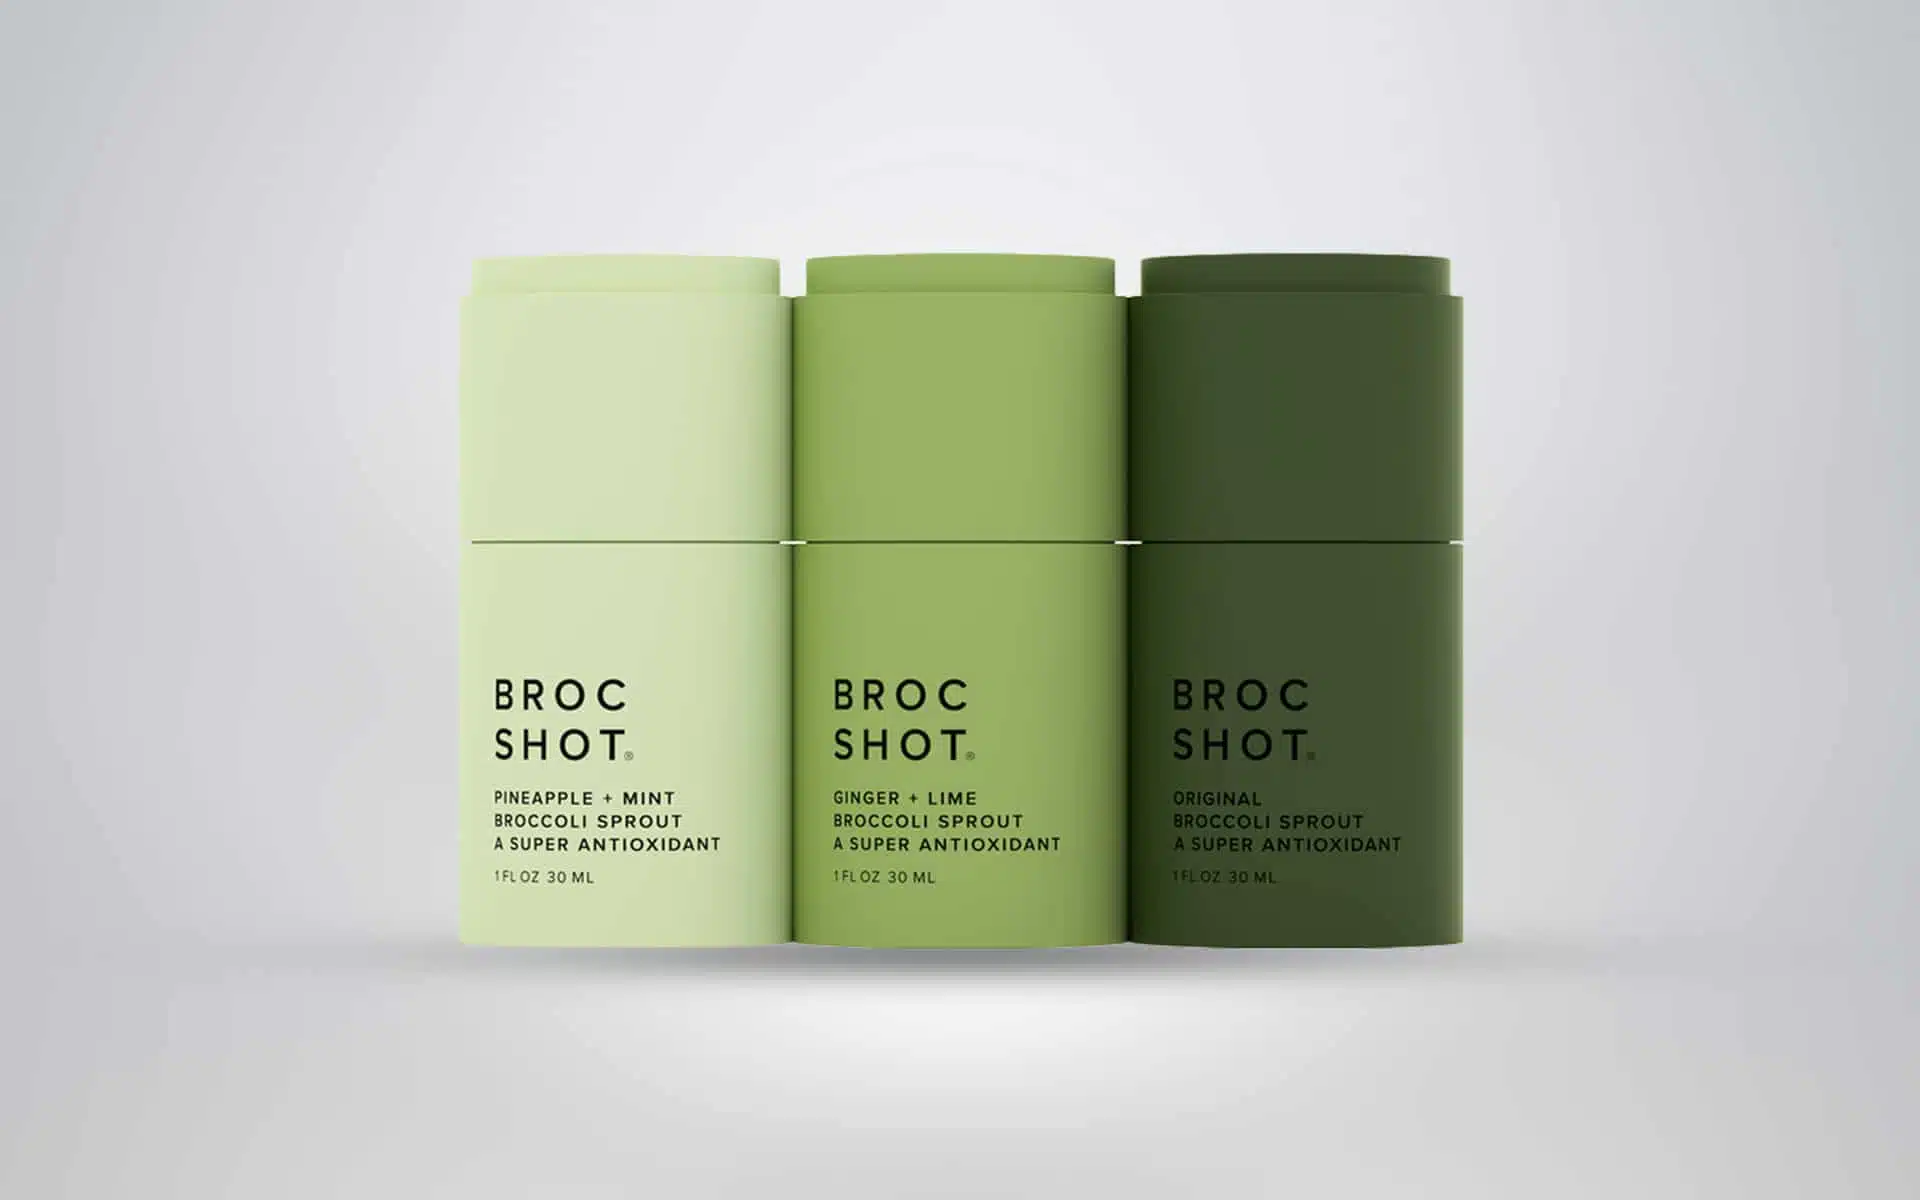 In the Us, the World's First Broccoli Sprout Shot, BROC SHOT® Launches